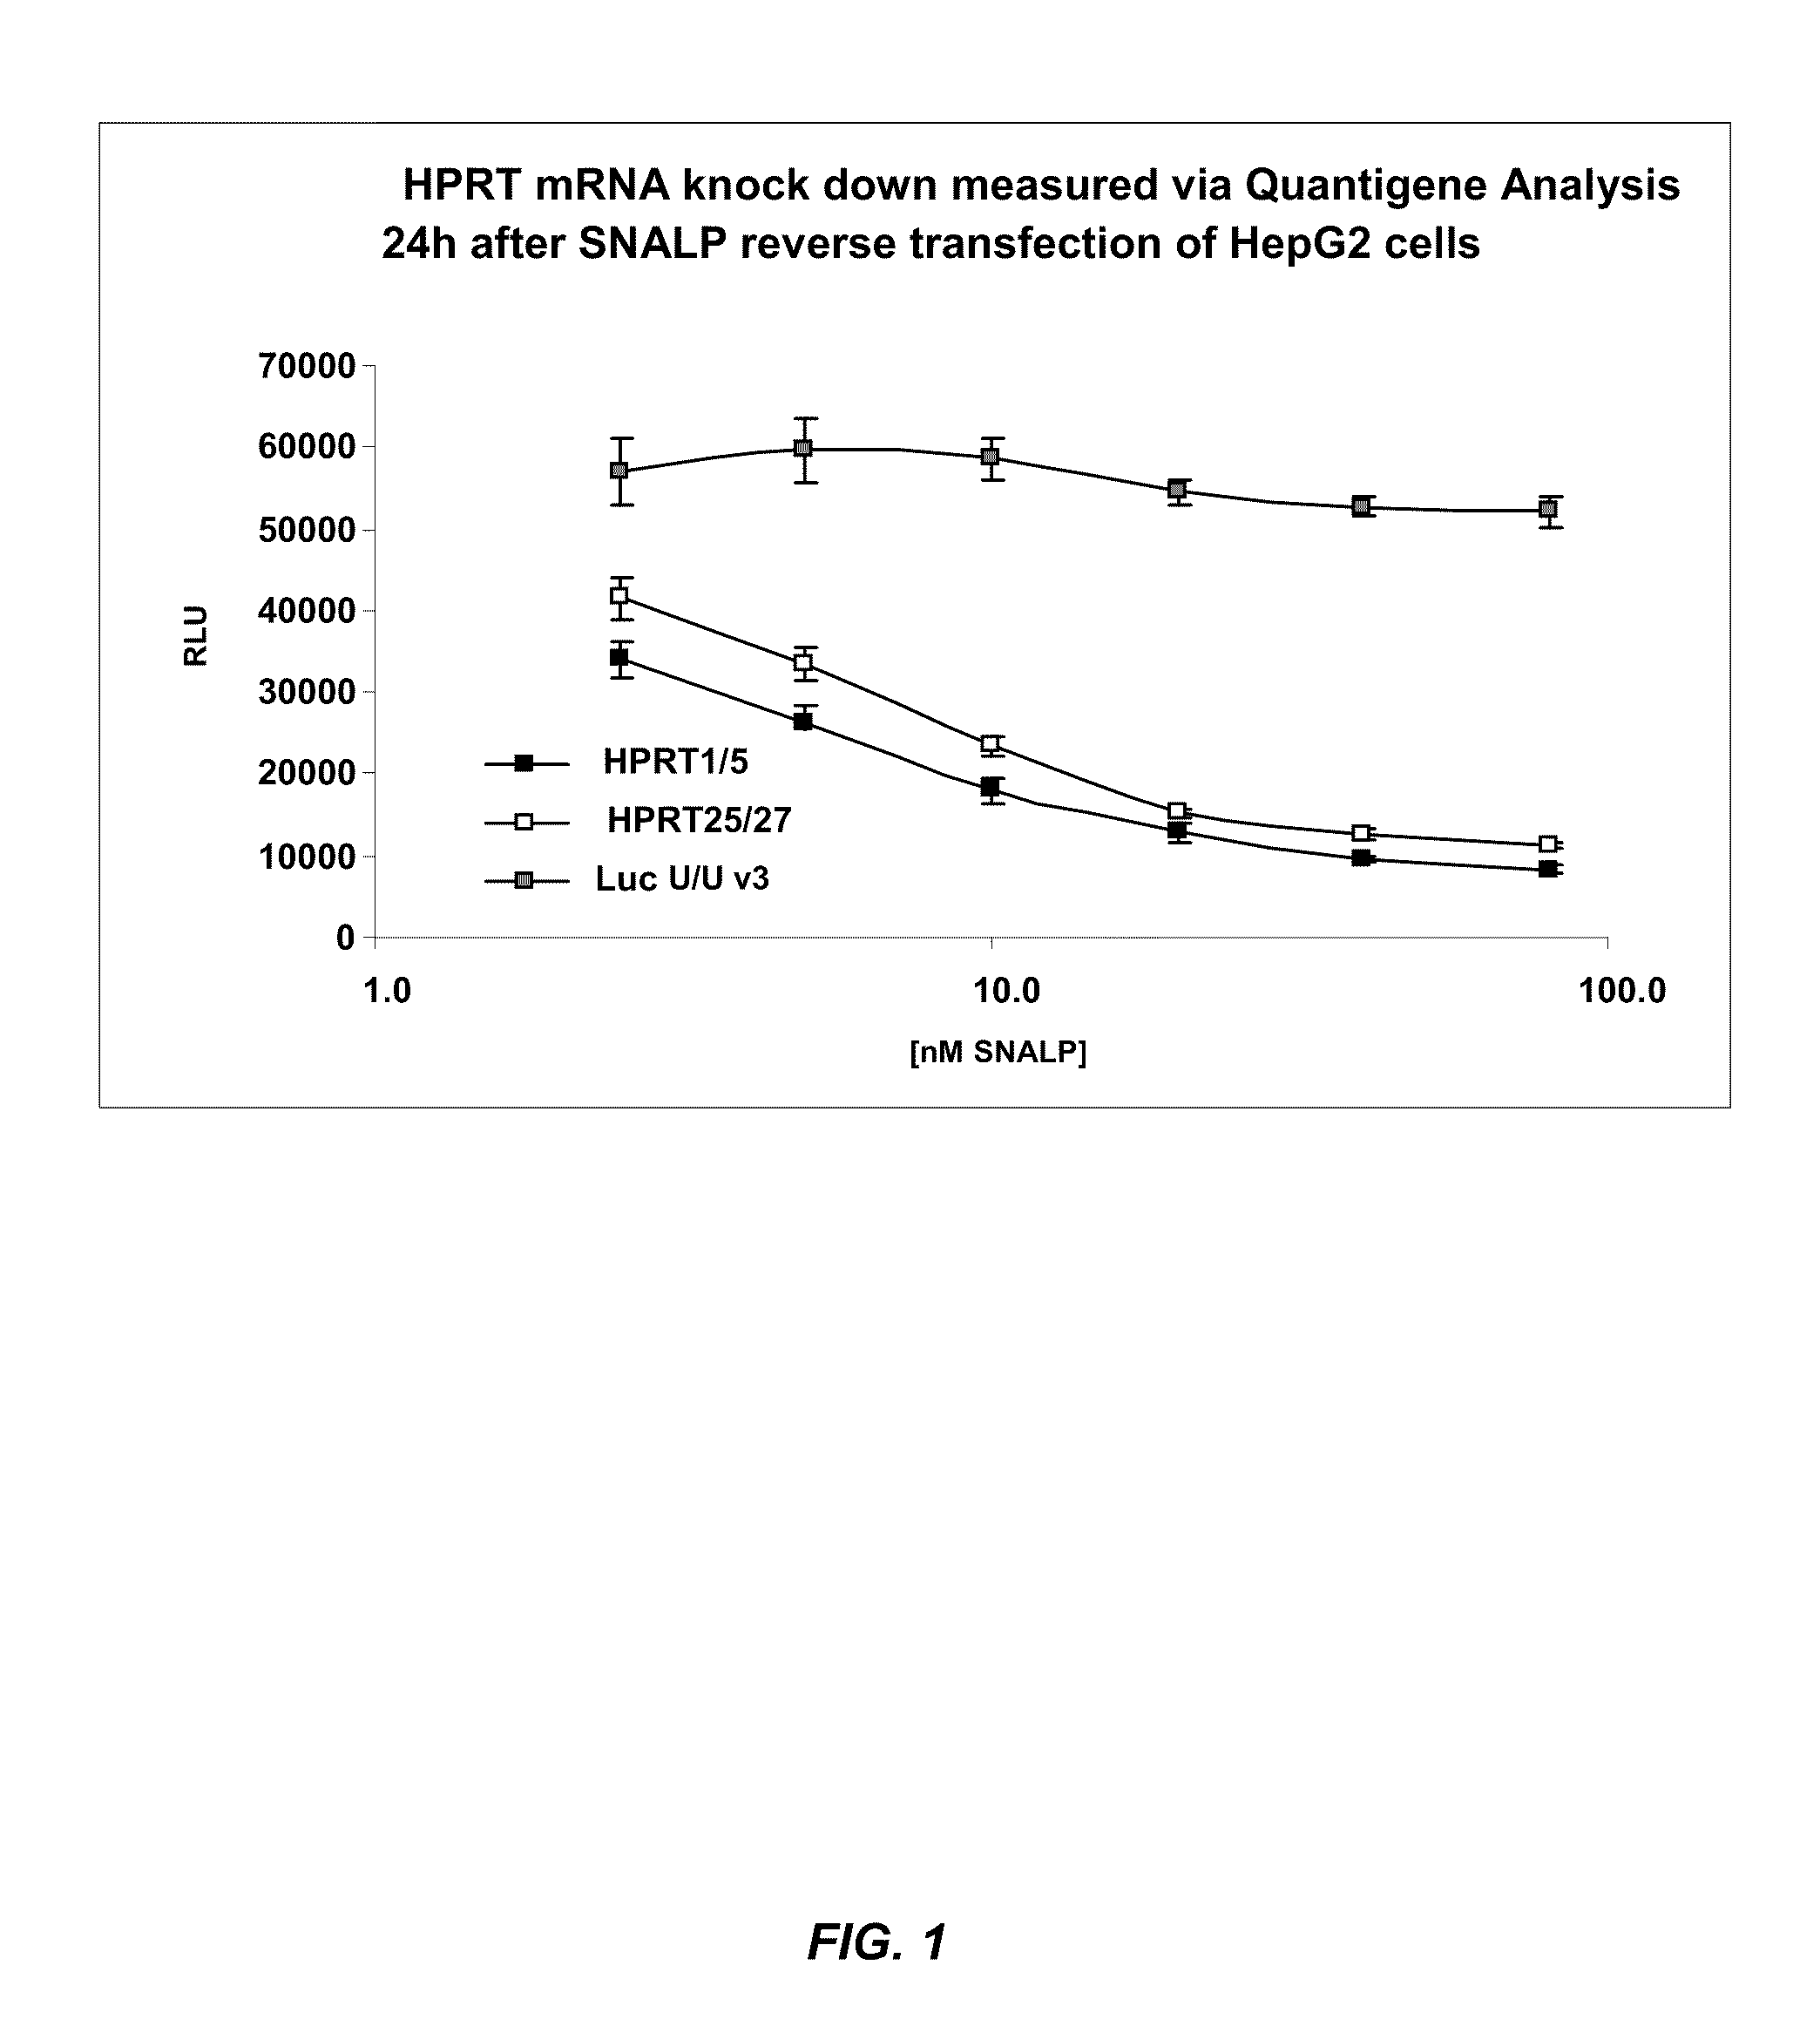 Lipid encapsulated dicer-substrate interfering RNA